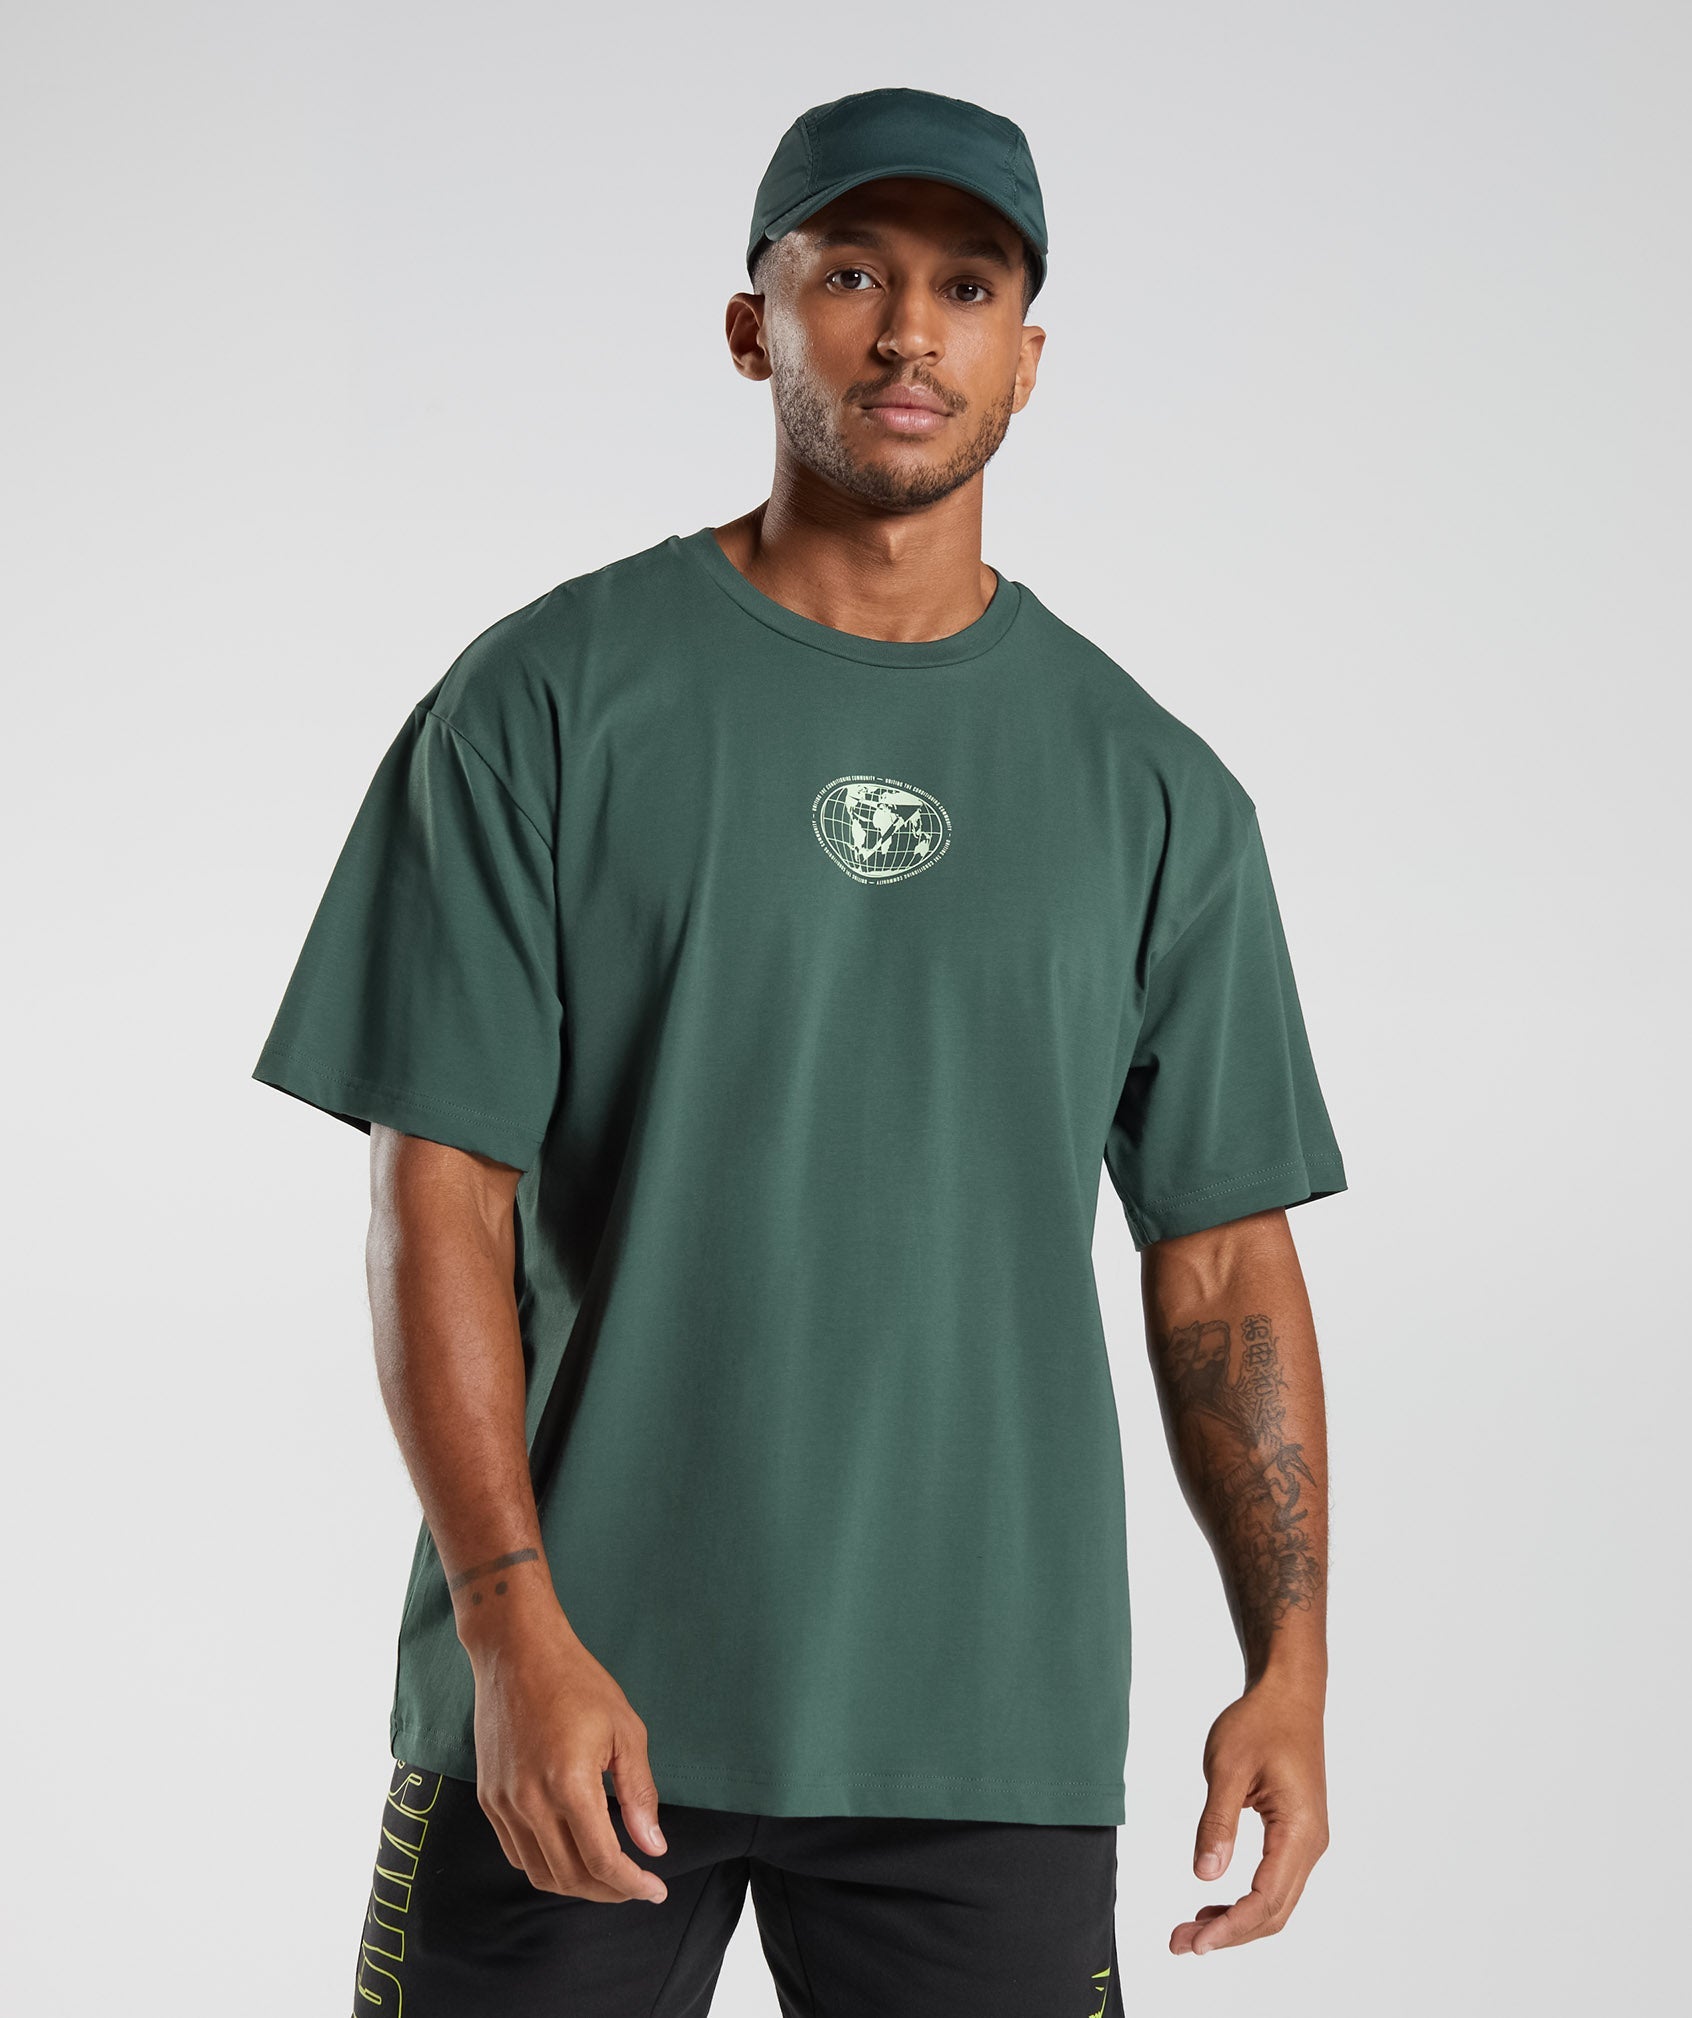 Recovery Graphic T-Shirt in Obsidian Green - view 3